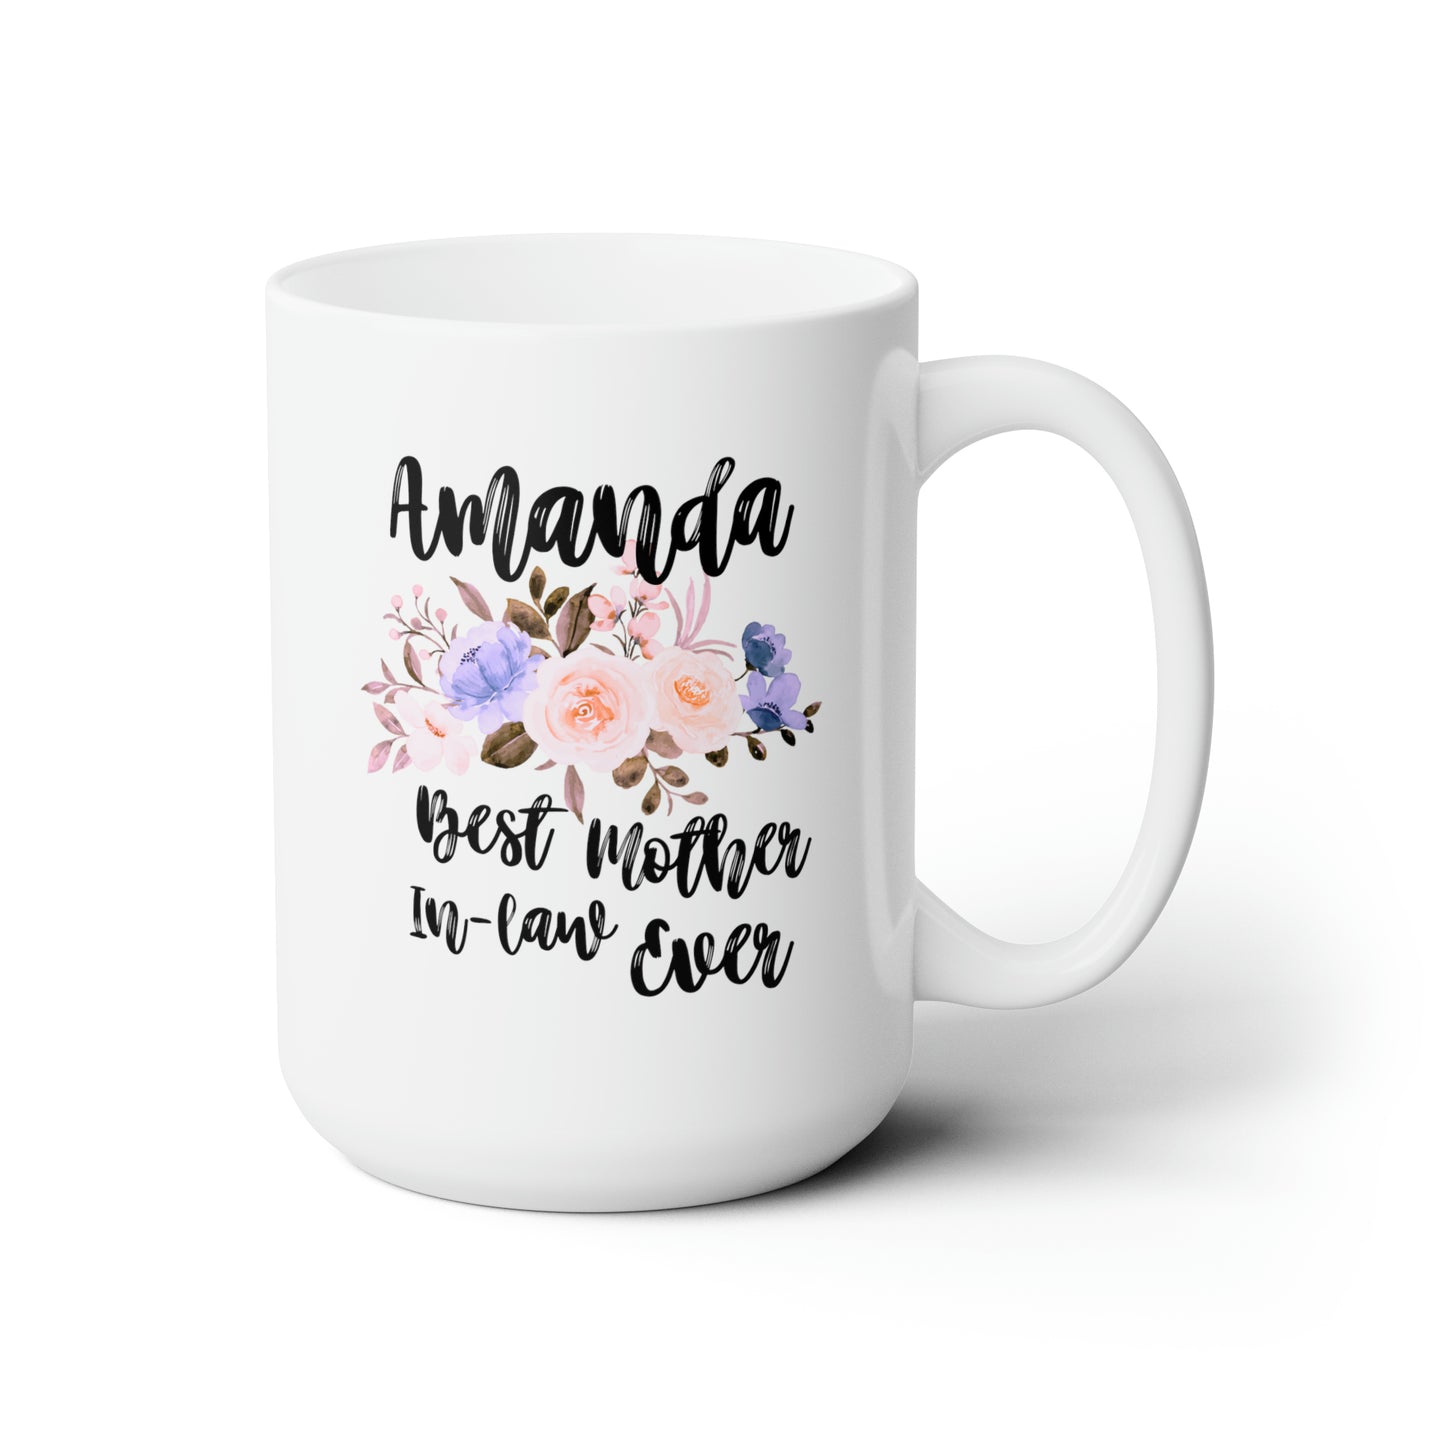 Best Mother-In-Law Ever 15oz white funny large coffee mug gift for in law mothers day present custom name personalize customize waveywares wavey wares wavywares wavy wares